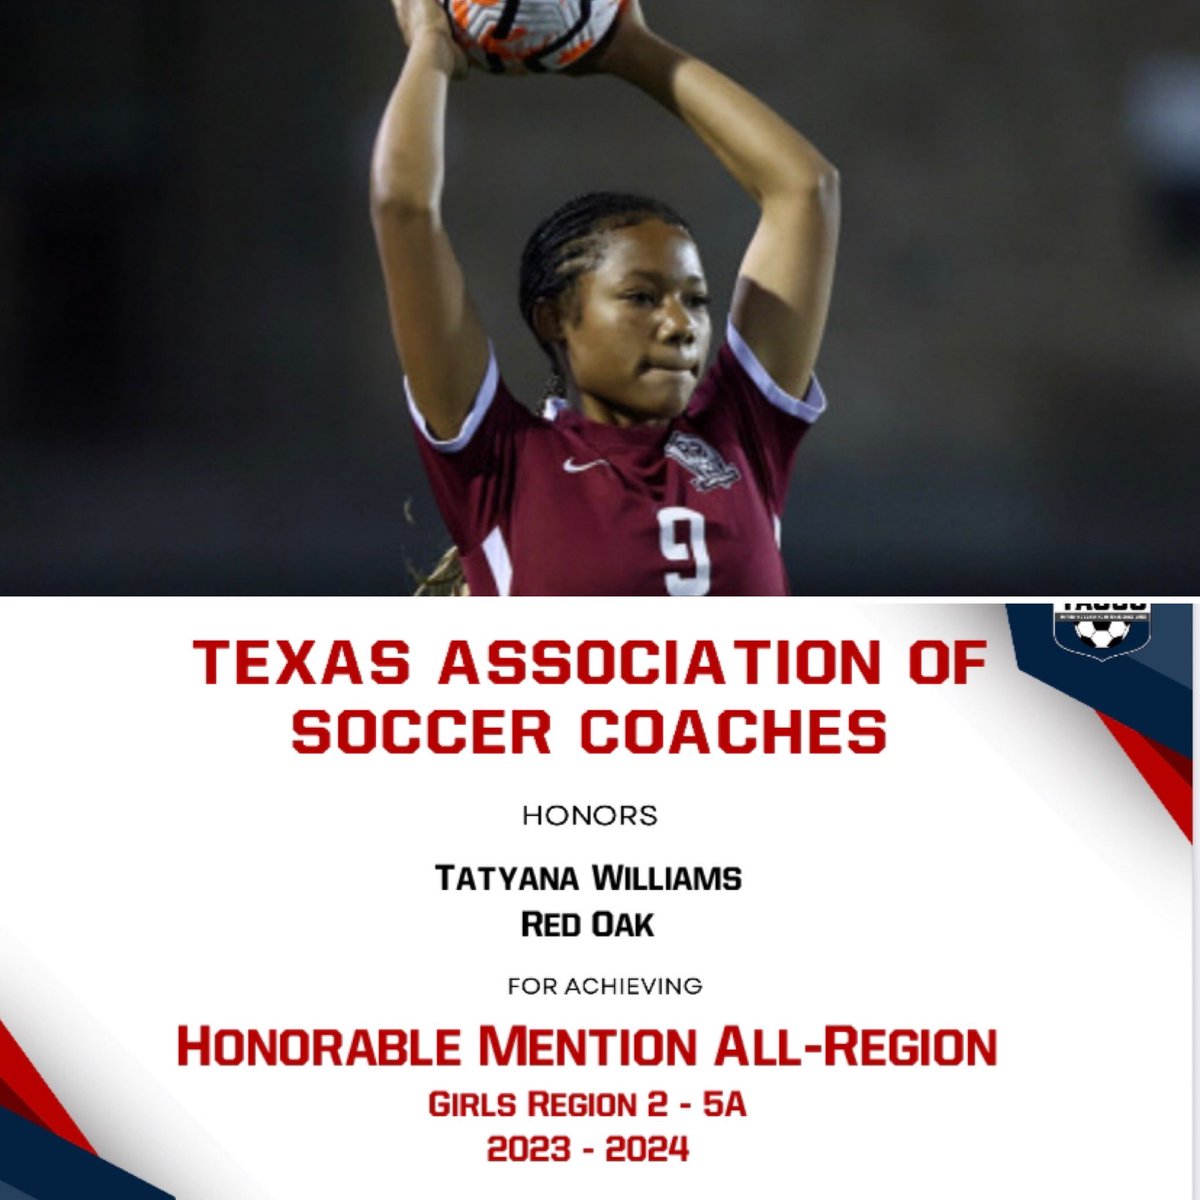 Congrats to @Tyewilliams2007 for being named @tascosoccer Honorable Mention All-Region Midfielder for 5A region 2. Awesome honor! @roisdathletics @BamaStateWSC @rohighschool @SportsDayHS @EllisCoSports